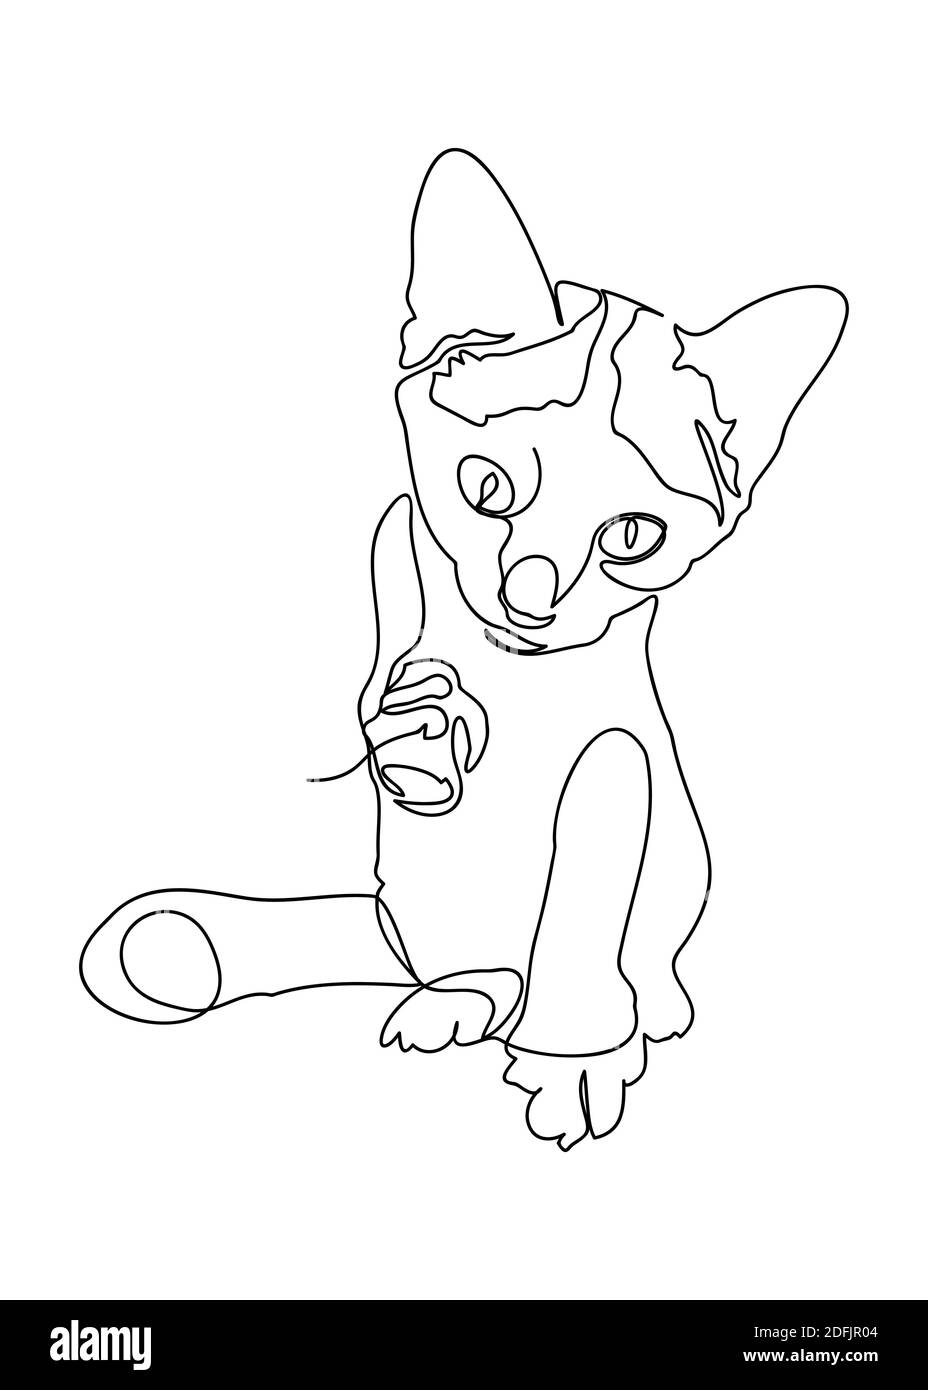 Continuous line drawing of kitten isolated on white background, vector illustration Stock Vector